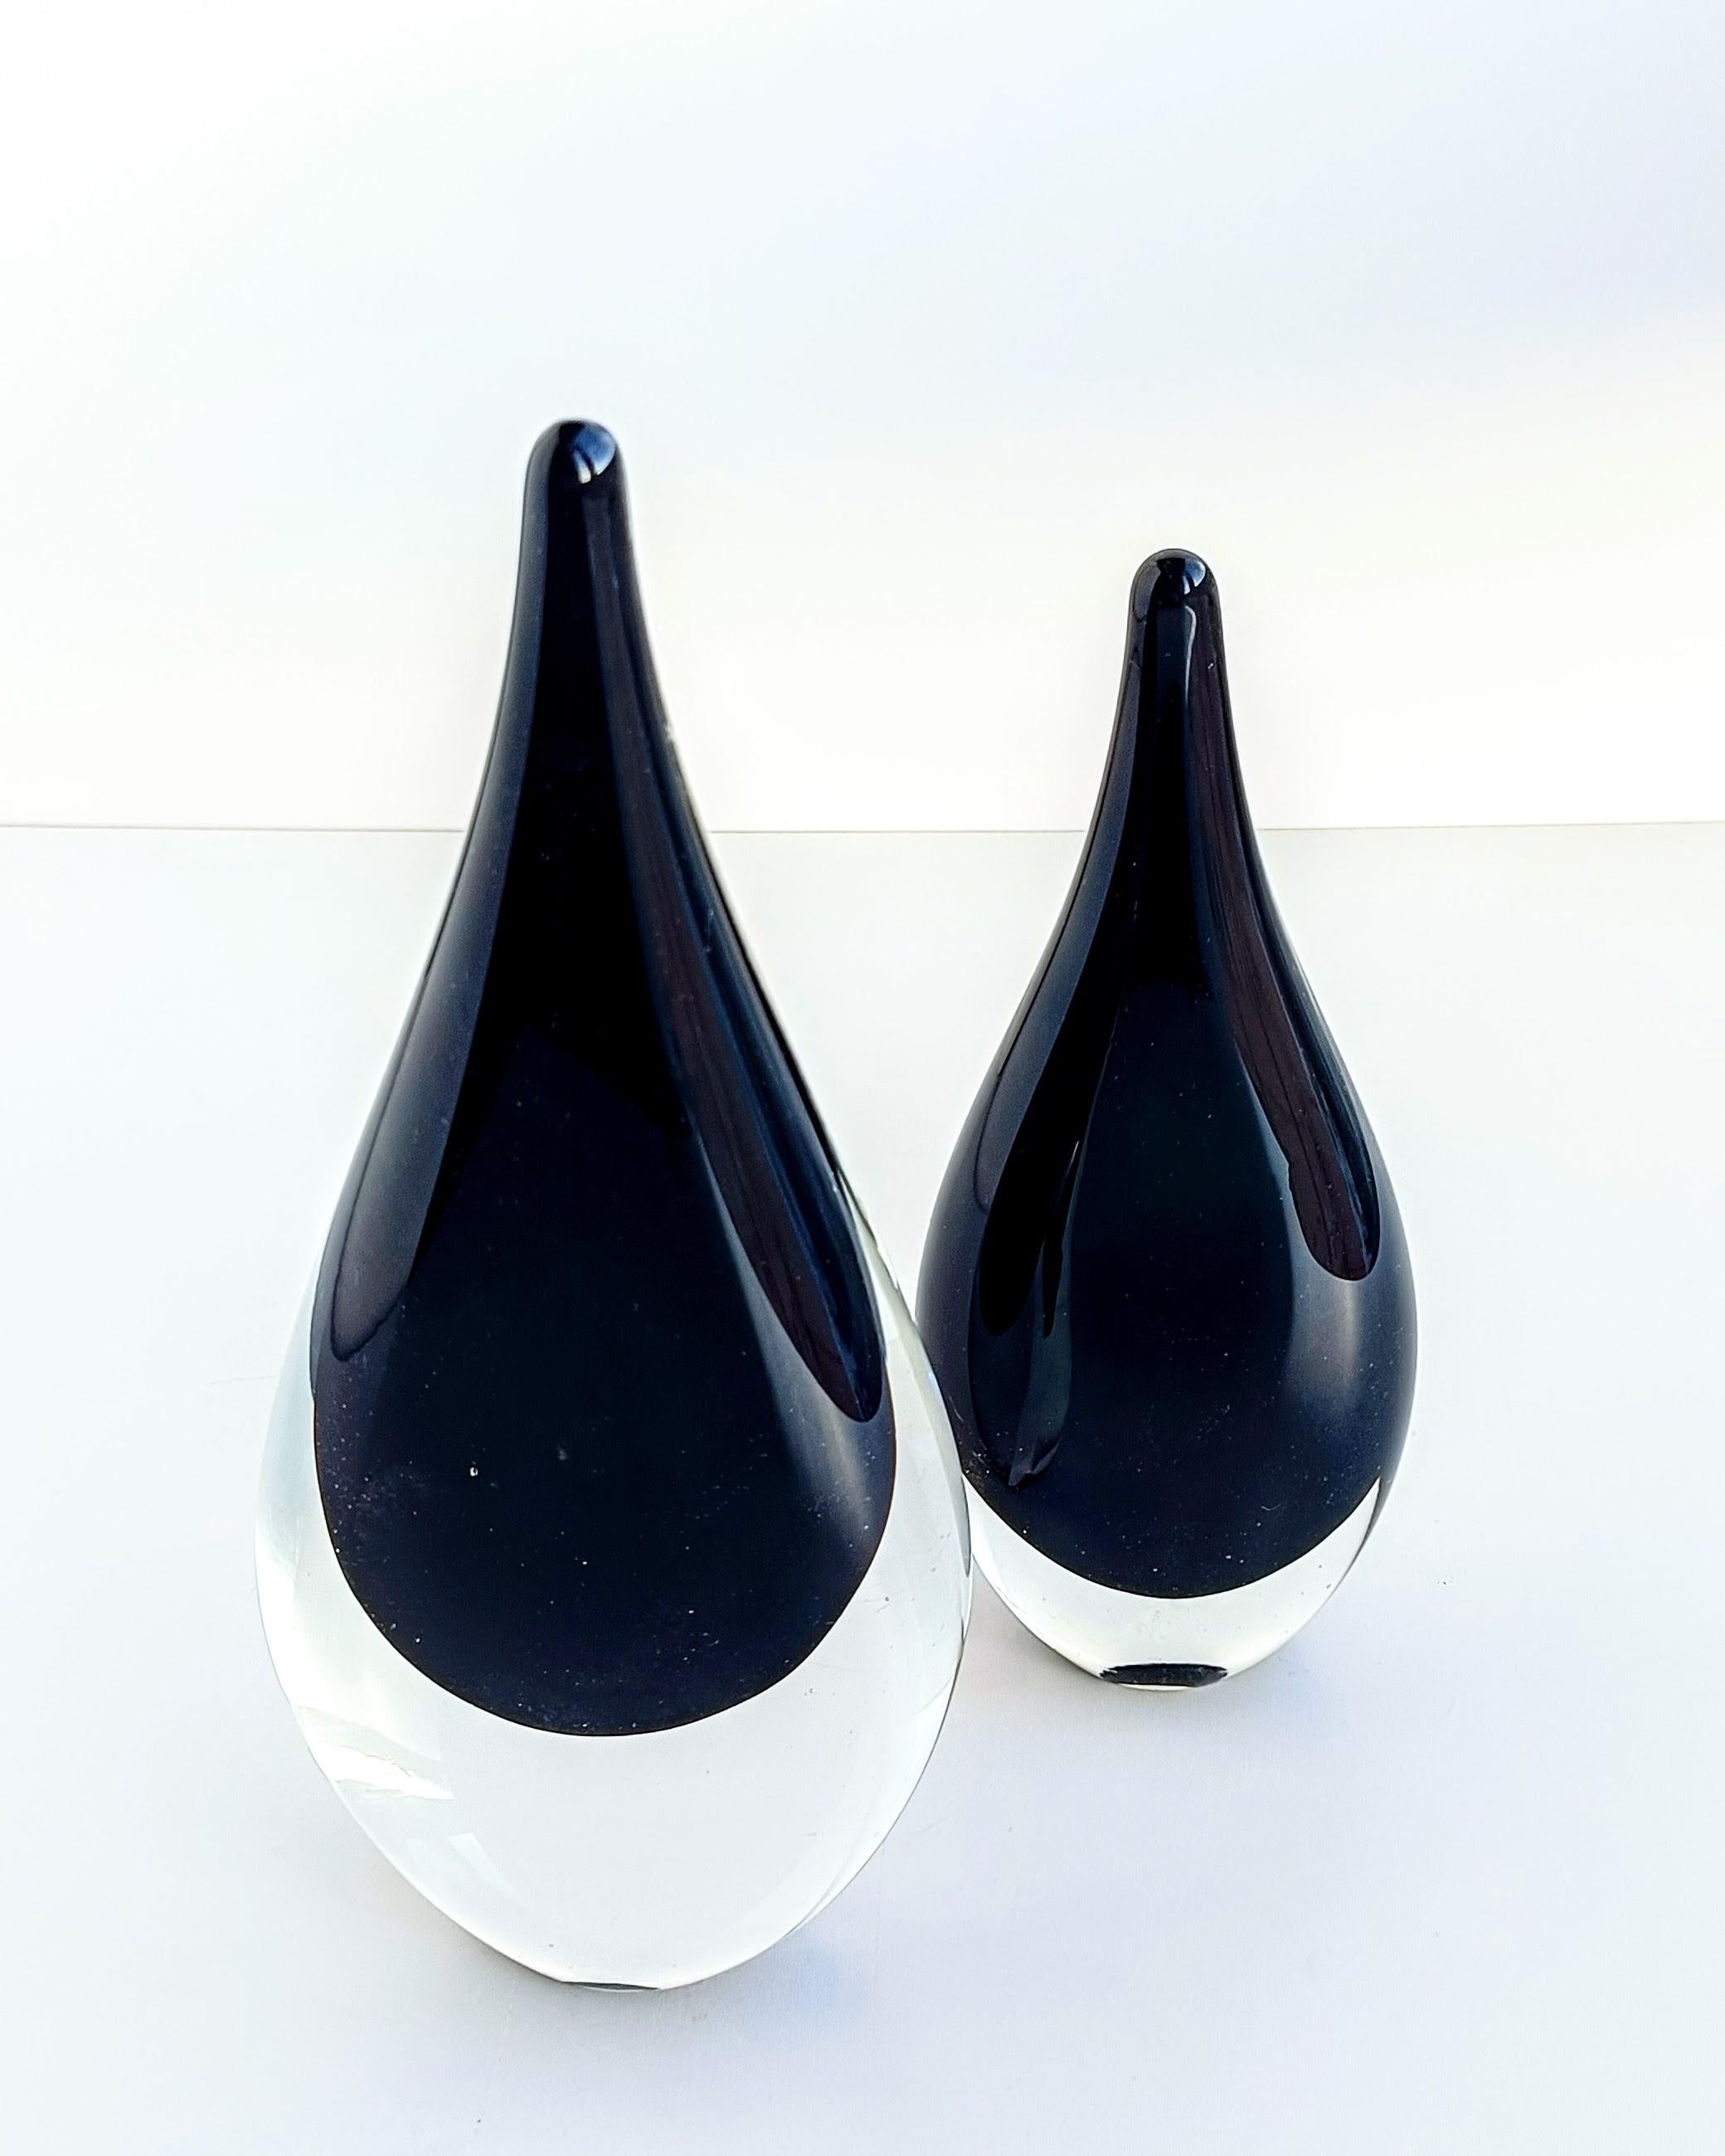 Vintage Italian Art Glass Minimalist Murano Sommerso Teardrop Sculptures, 1950s  In Excellent Condition For Sale In Valencia, VC